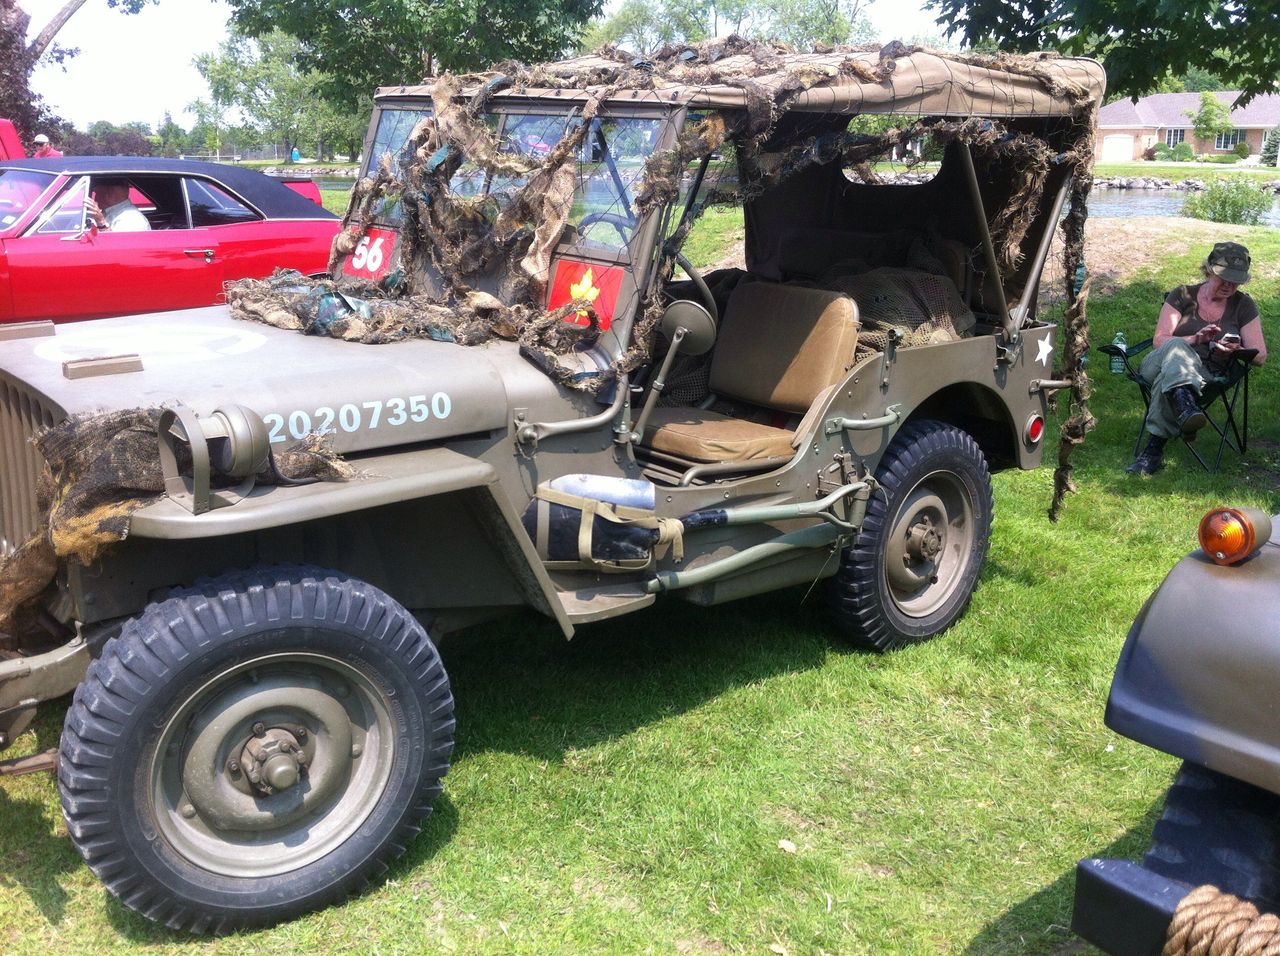 1940s Willys Jeep